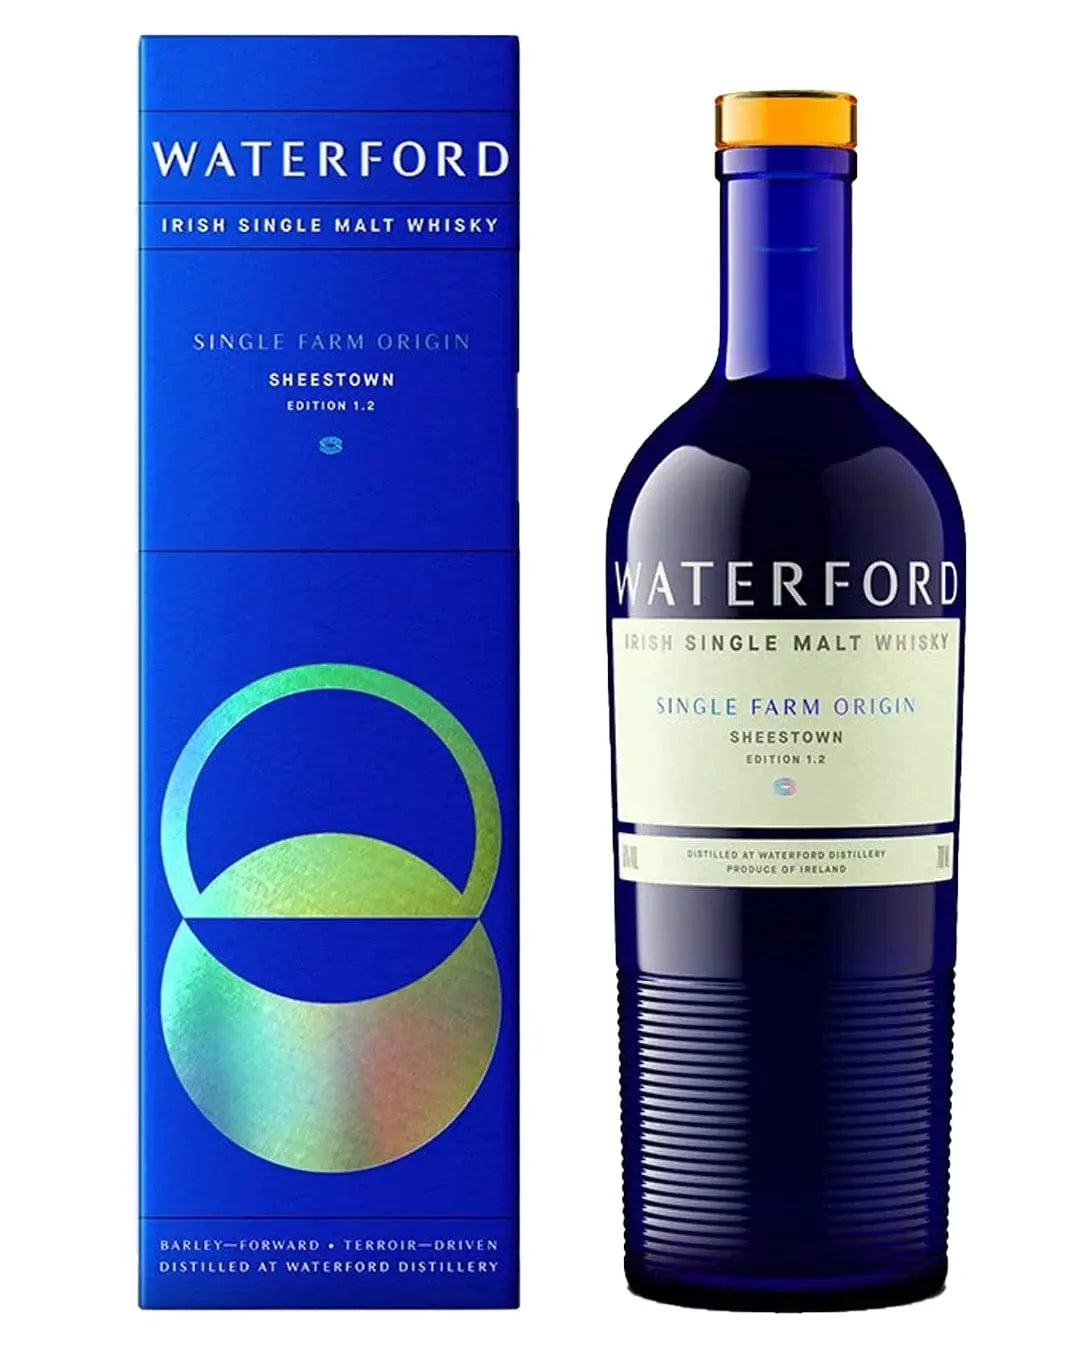 Waterford Single Malt Sheestown 1.2 Whisky, 70 cl Whisky